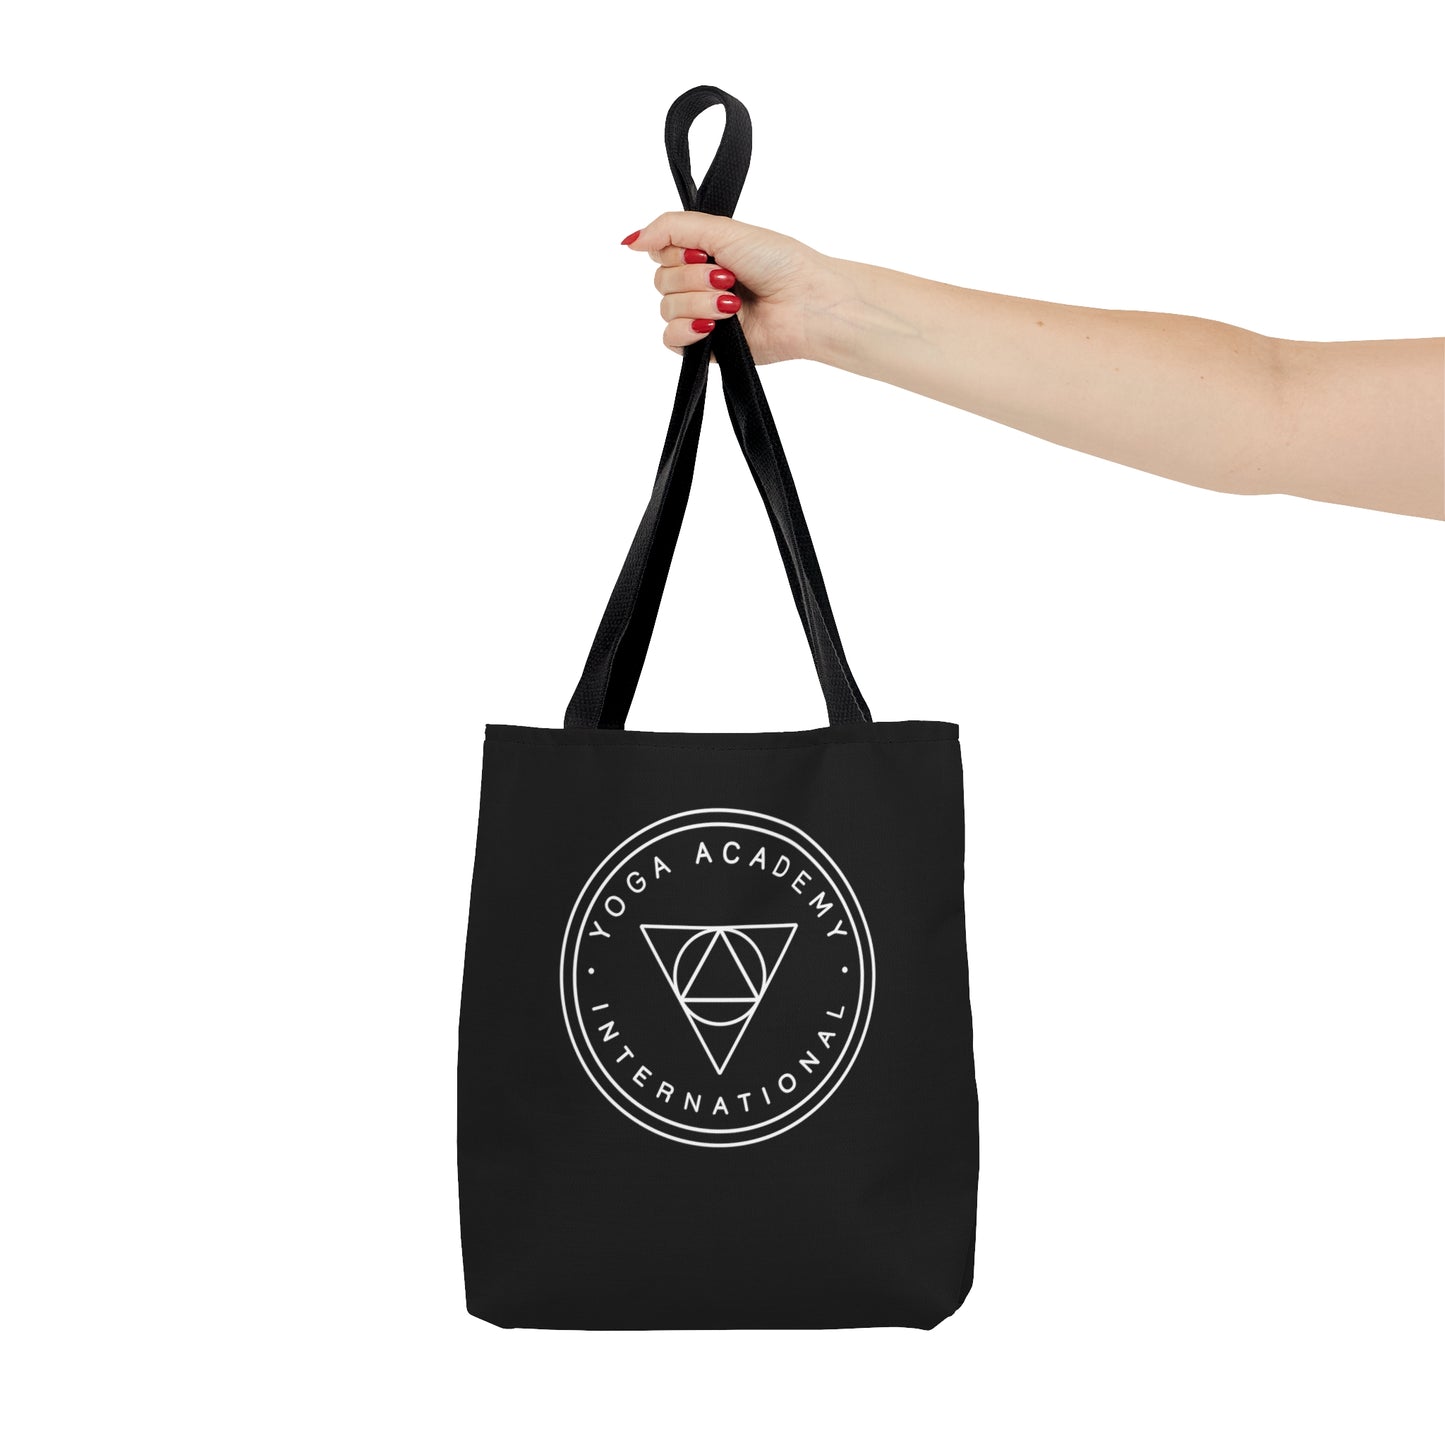 OFFICIAL TOTE BAG